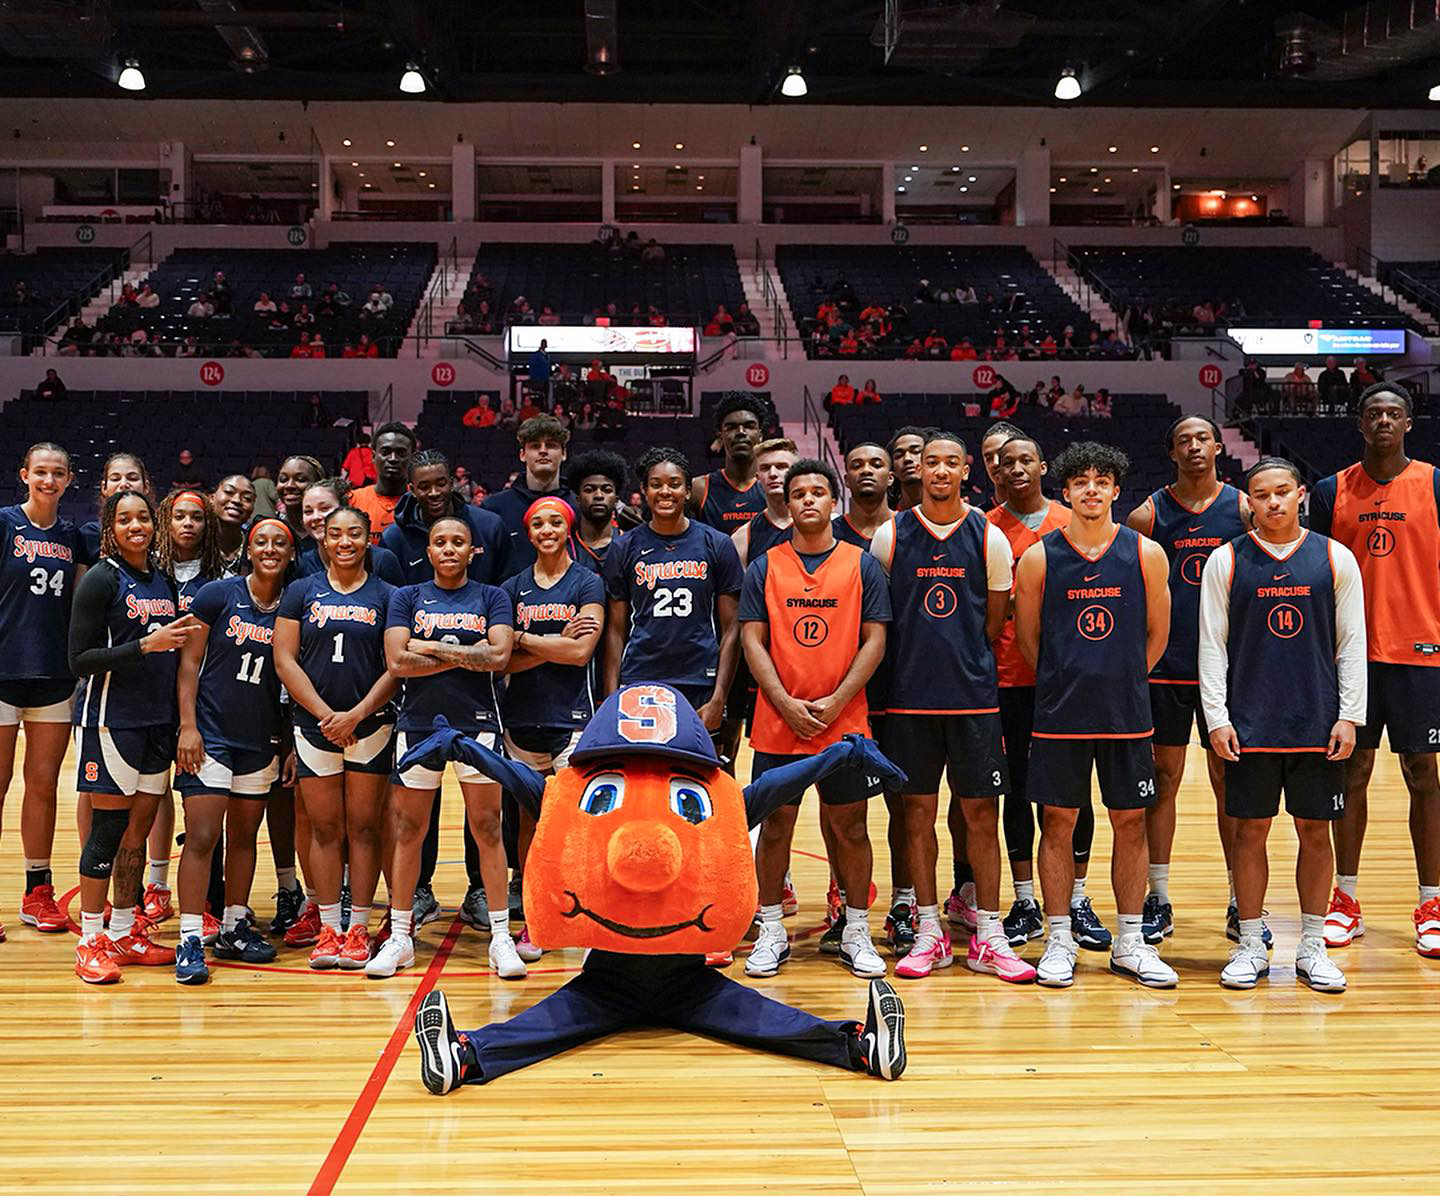 Men's and Women's basketball teams standing together on a court with Otto sitting in front of them